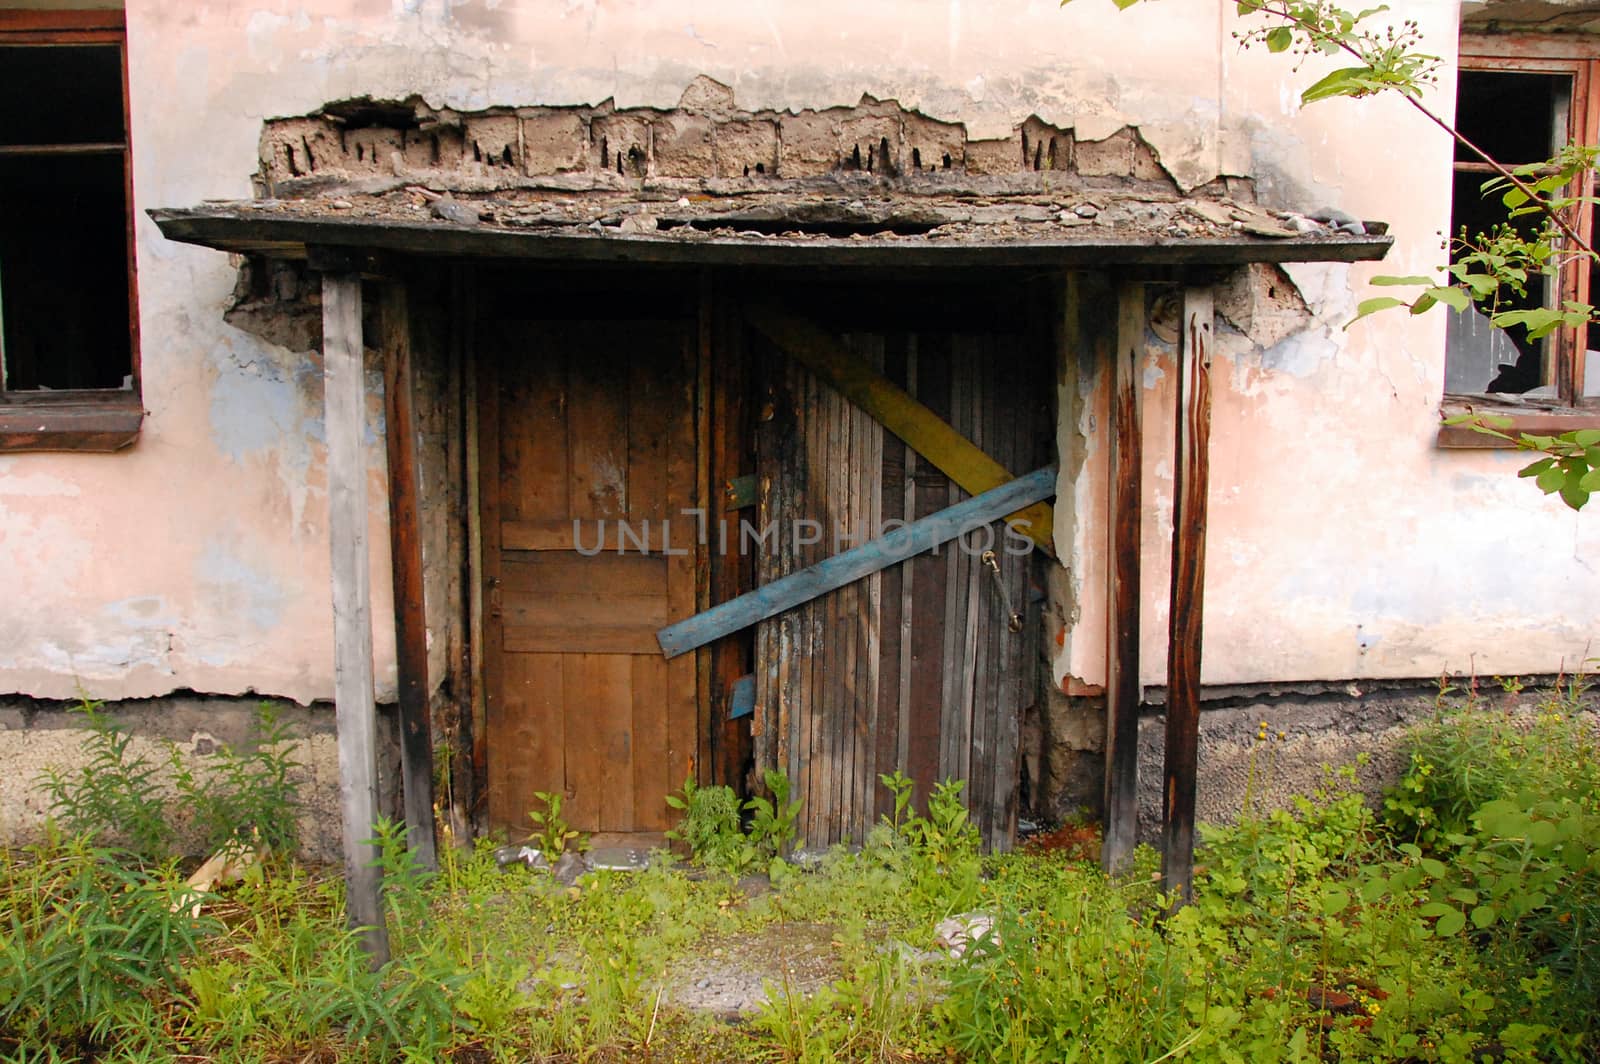 Abandoned building entrance, Russia outback